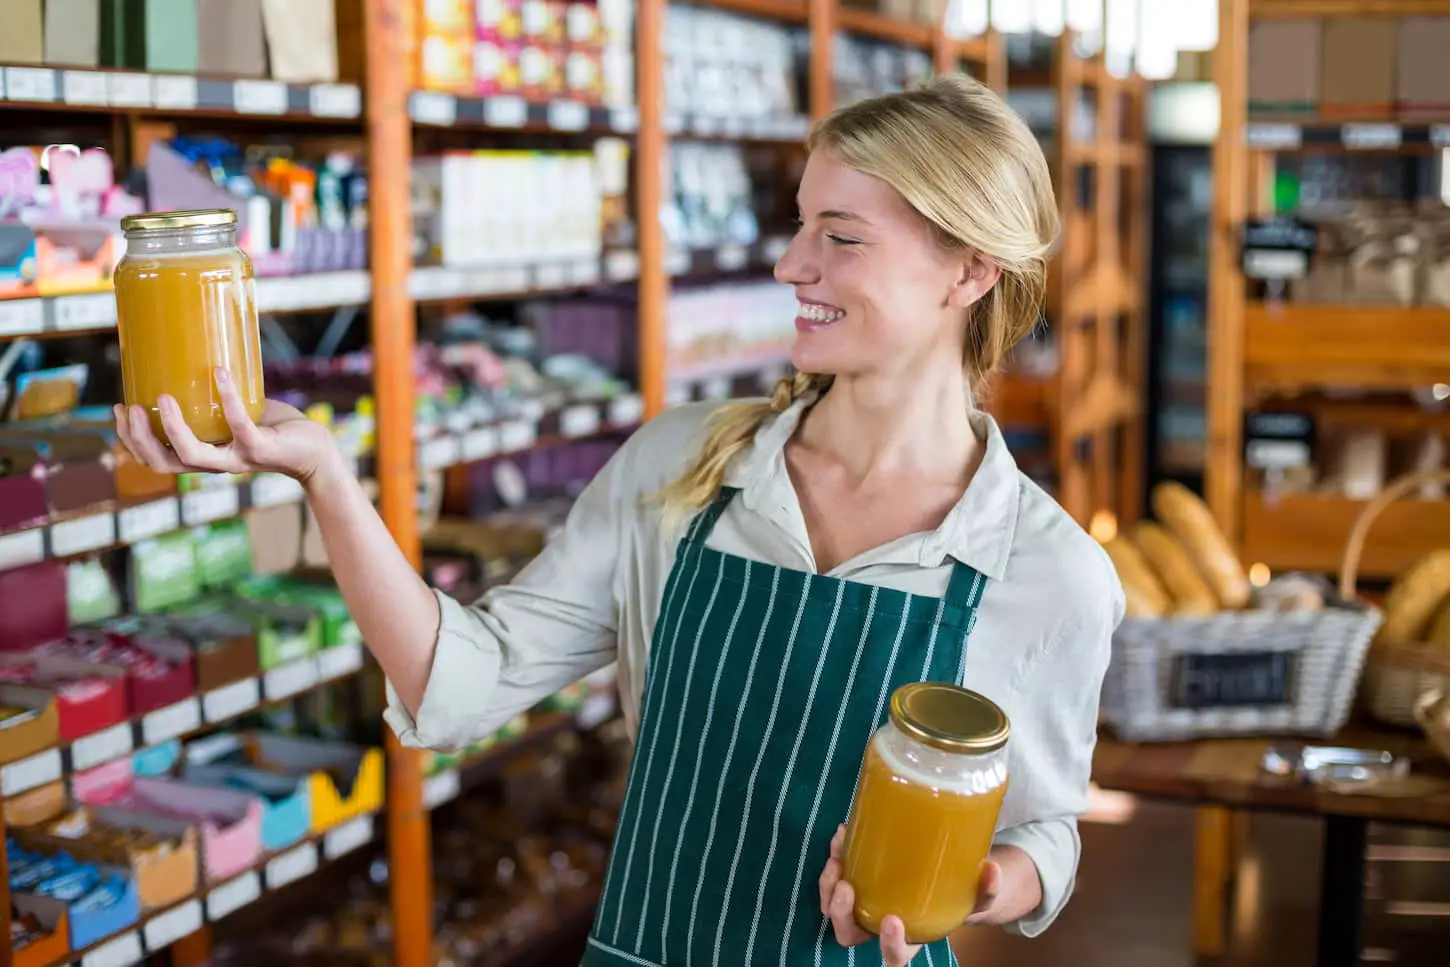 An image of a smiling female staff holding jars of honey in the supermarket store.